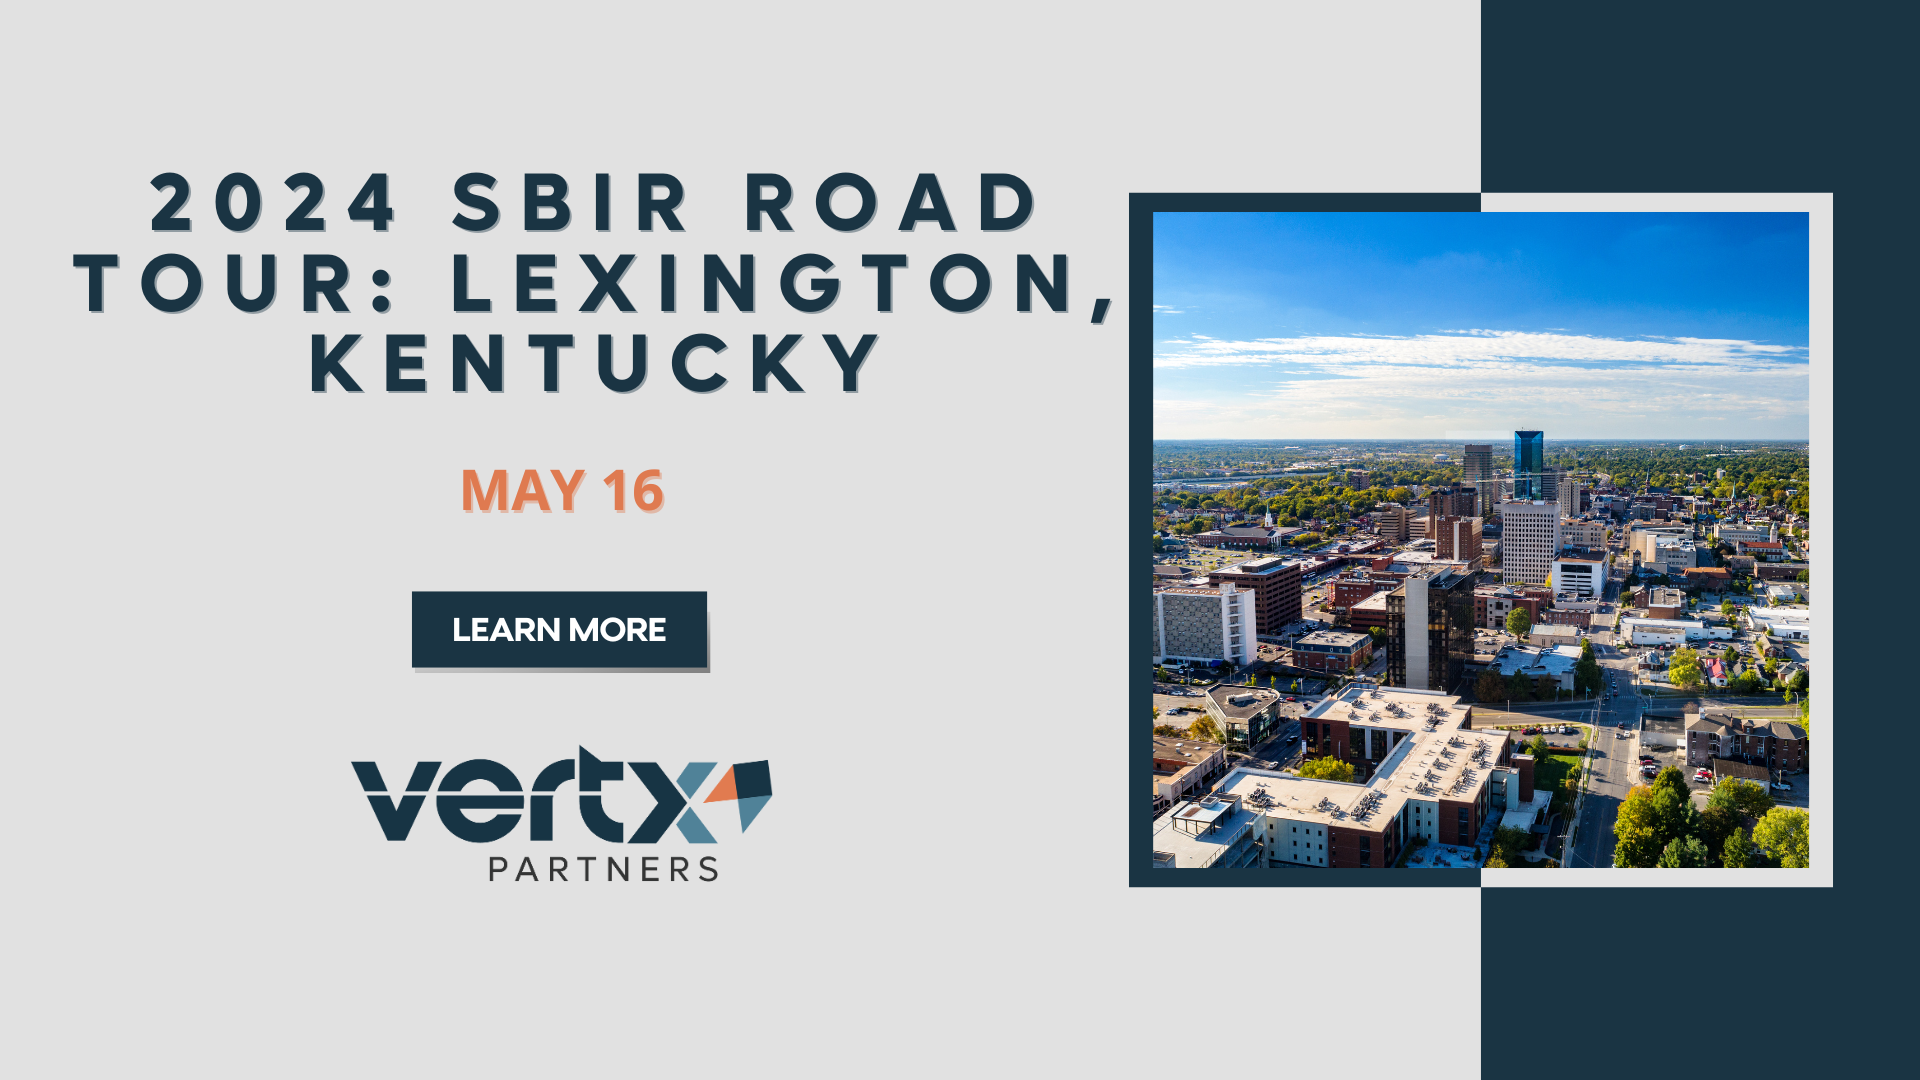 this graphic has the title 2024 SBIR Road Tour: Lexington, Kentucky with the date may 16th under it and a photo of lexington kentucky downtown to the right with a blue sky in the background